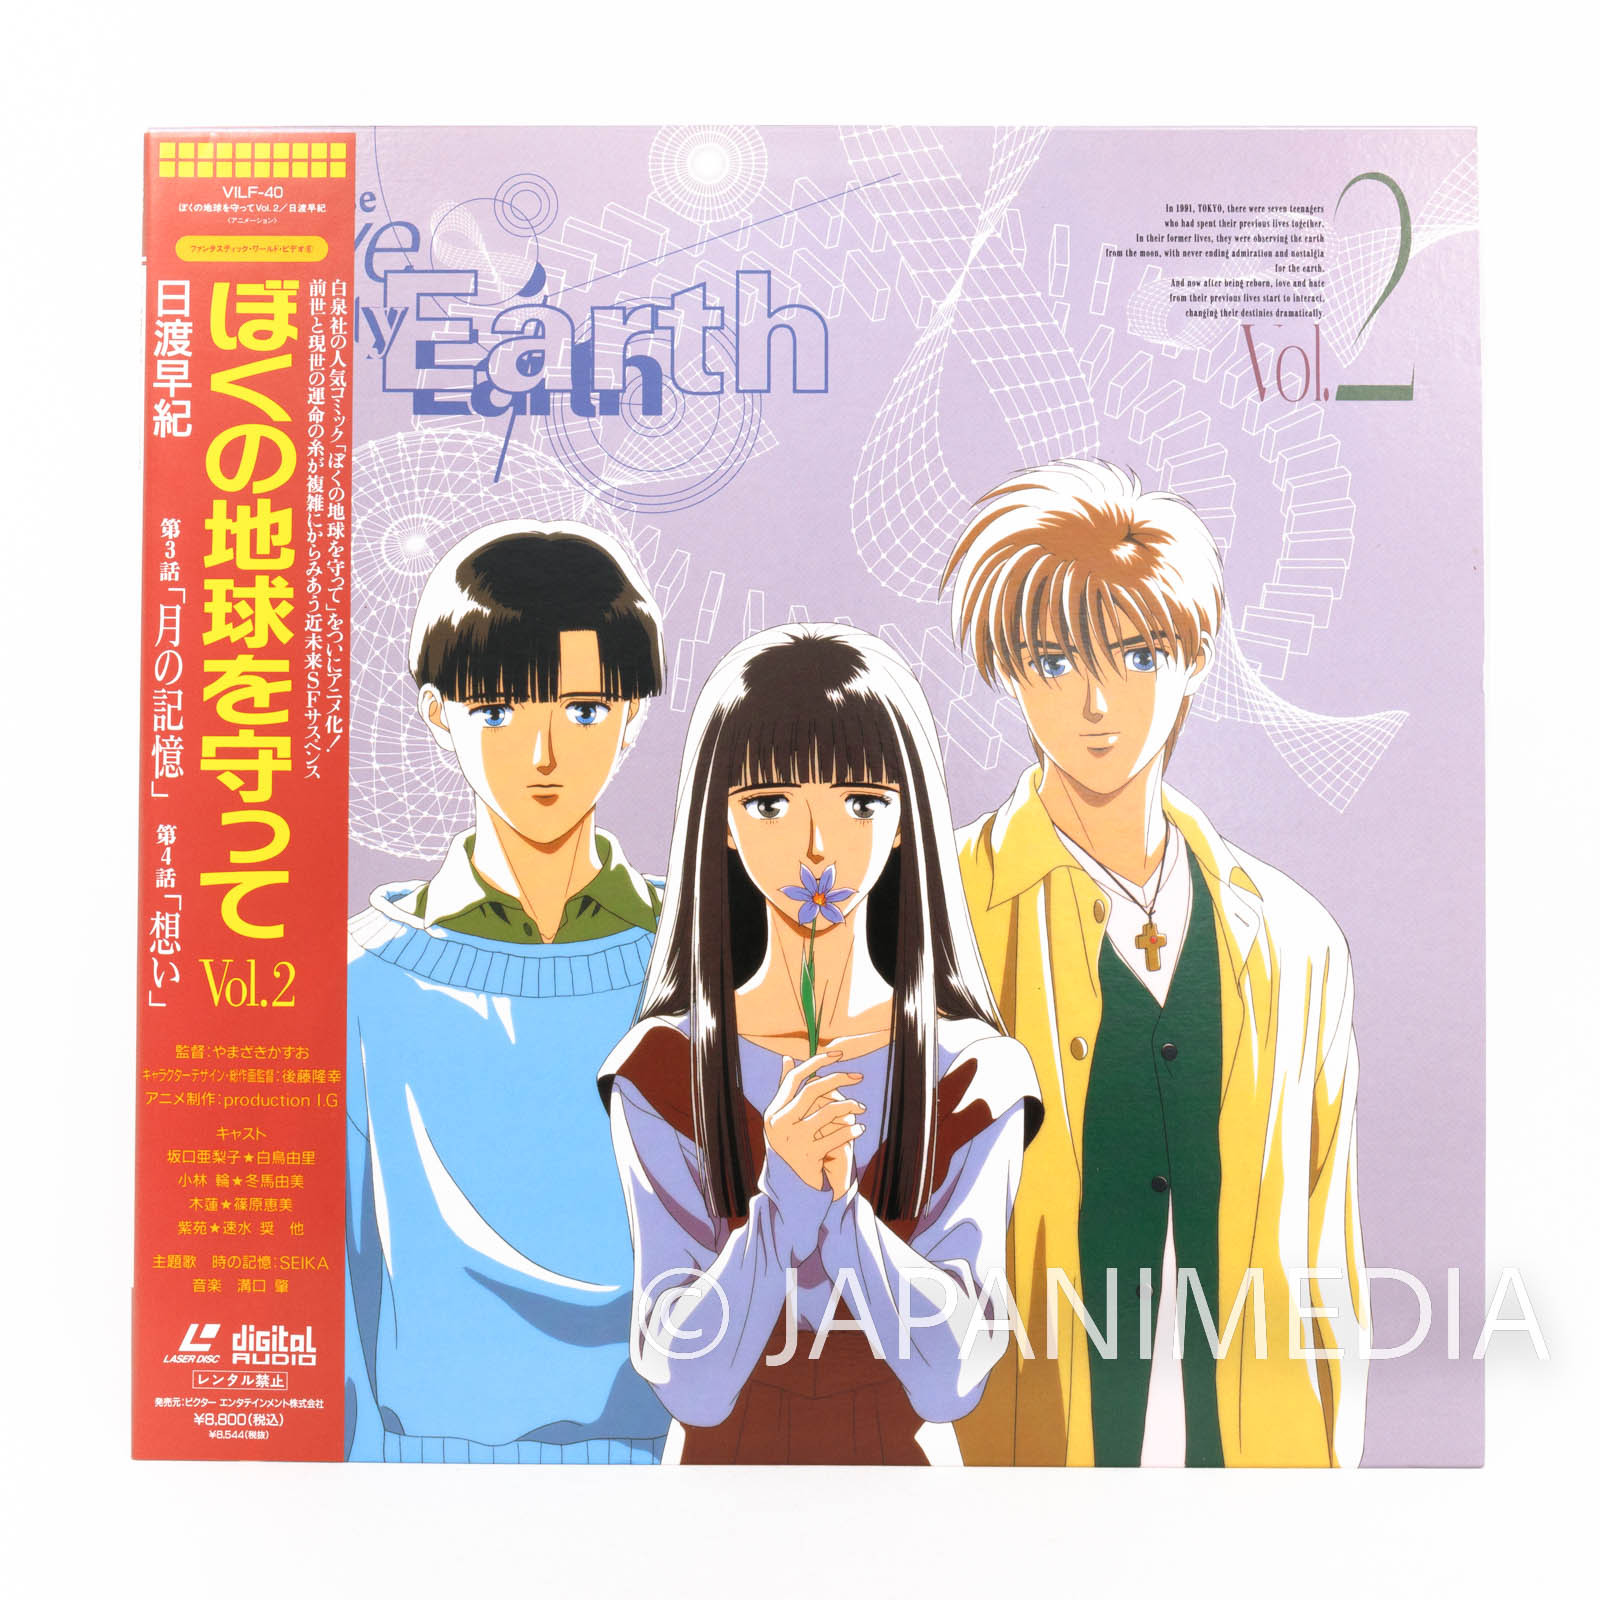 LD] Please Save My Earth vol.1 (Episode 1-2) JAPAN ANIME